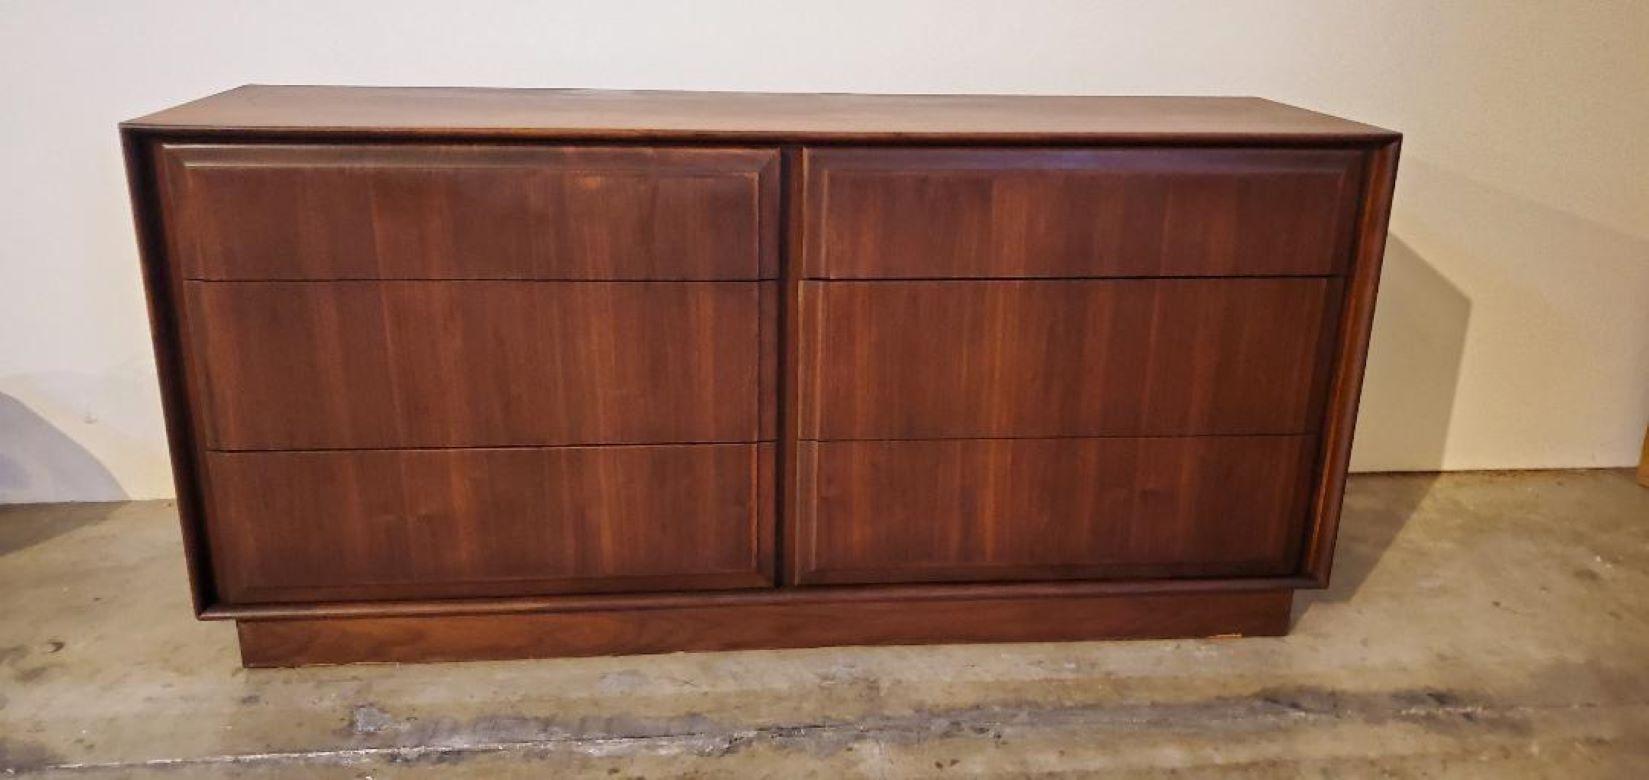 1960s Vintage Dillingham Walnut 6 Drawer Dresser Attributed to Milo Baughman In Good Condition For Sale In Monrovia, CA